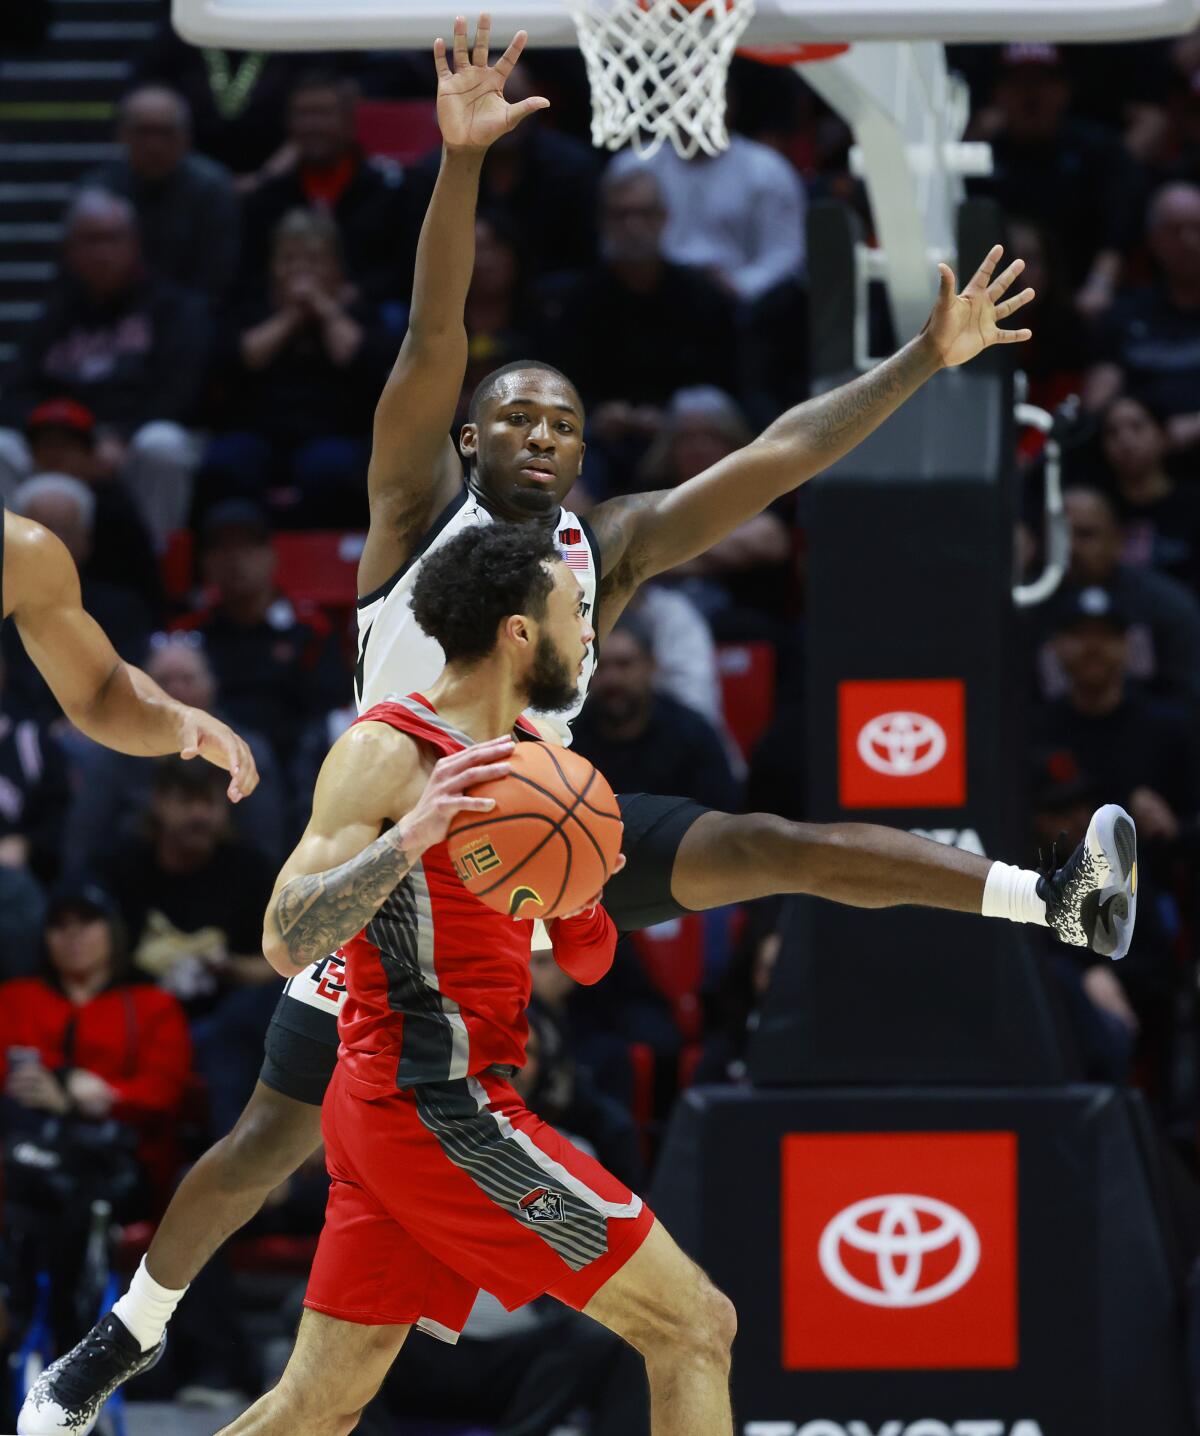 San Diego State's Darrion Trammell protects New Mexico's Jaelen House.